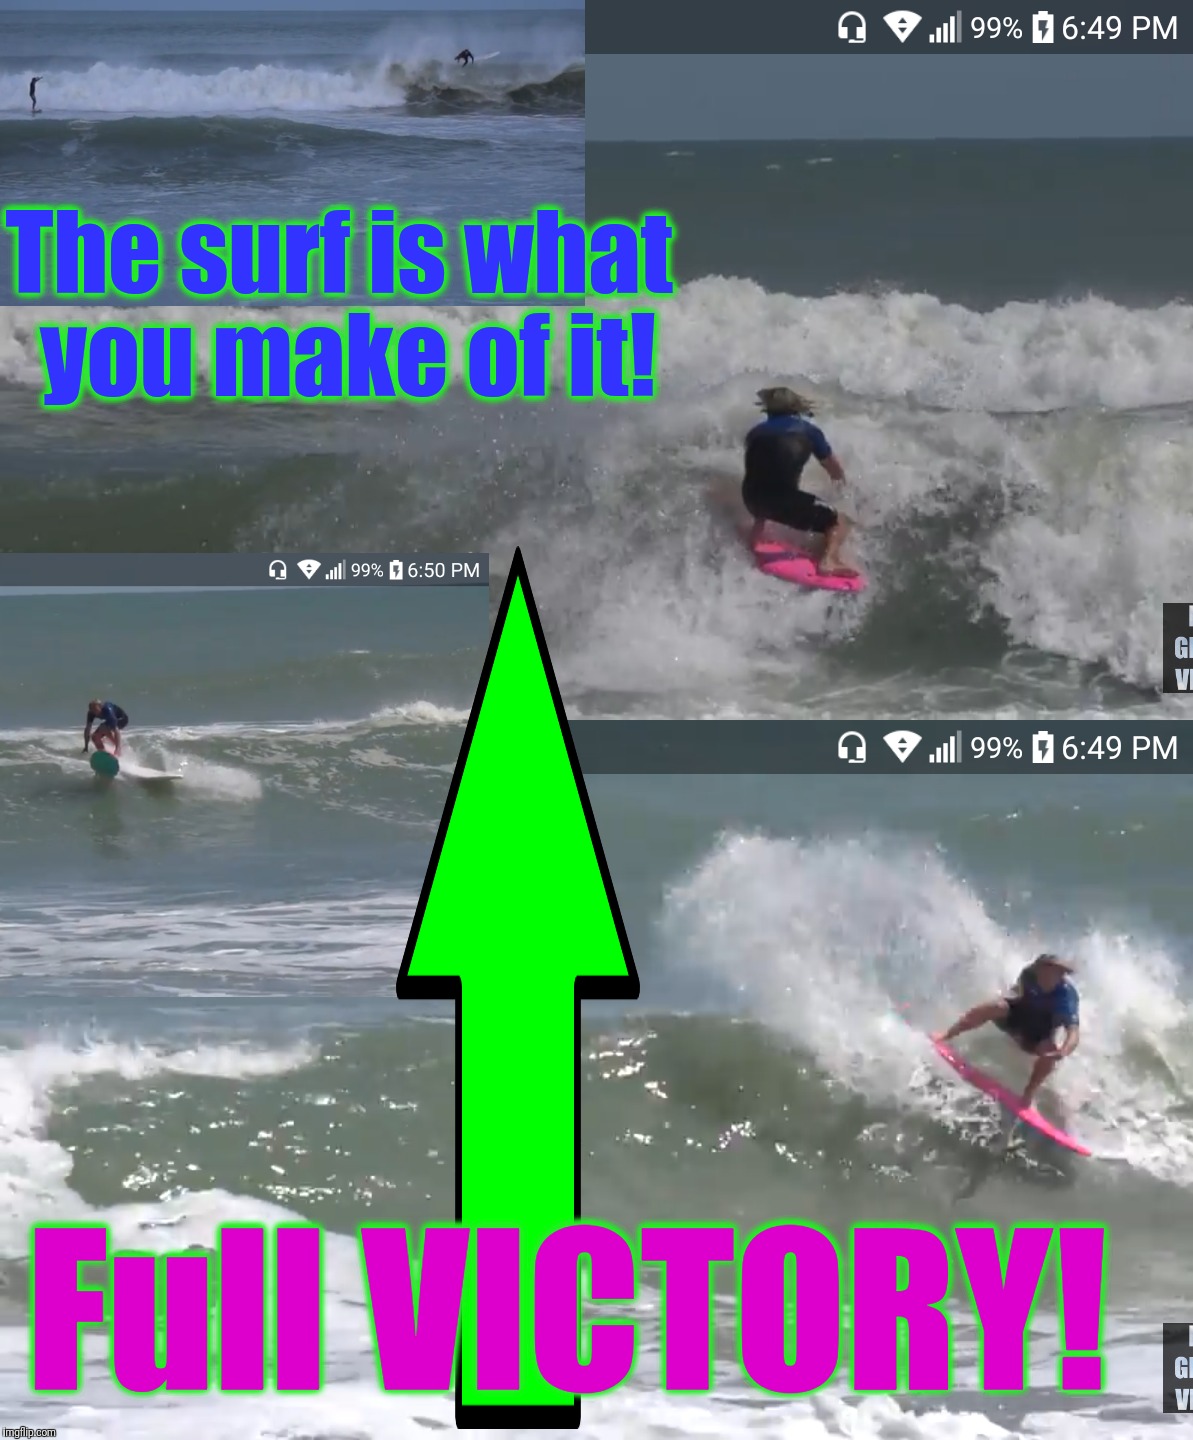 The surf is what you make of it! Full VICTORY! | made w/ Imgflip meme maker